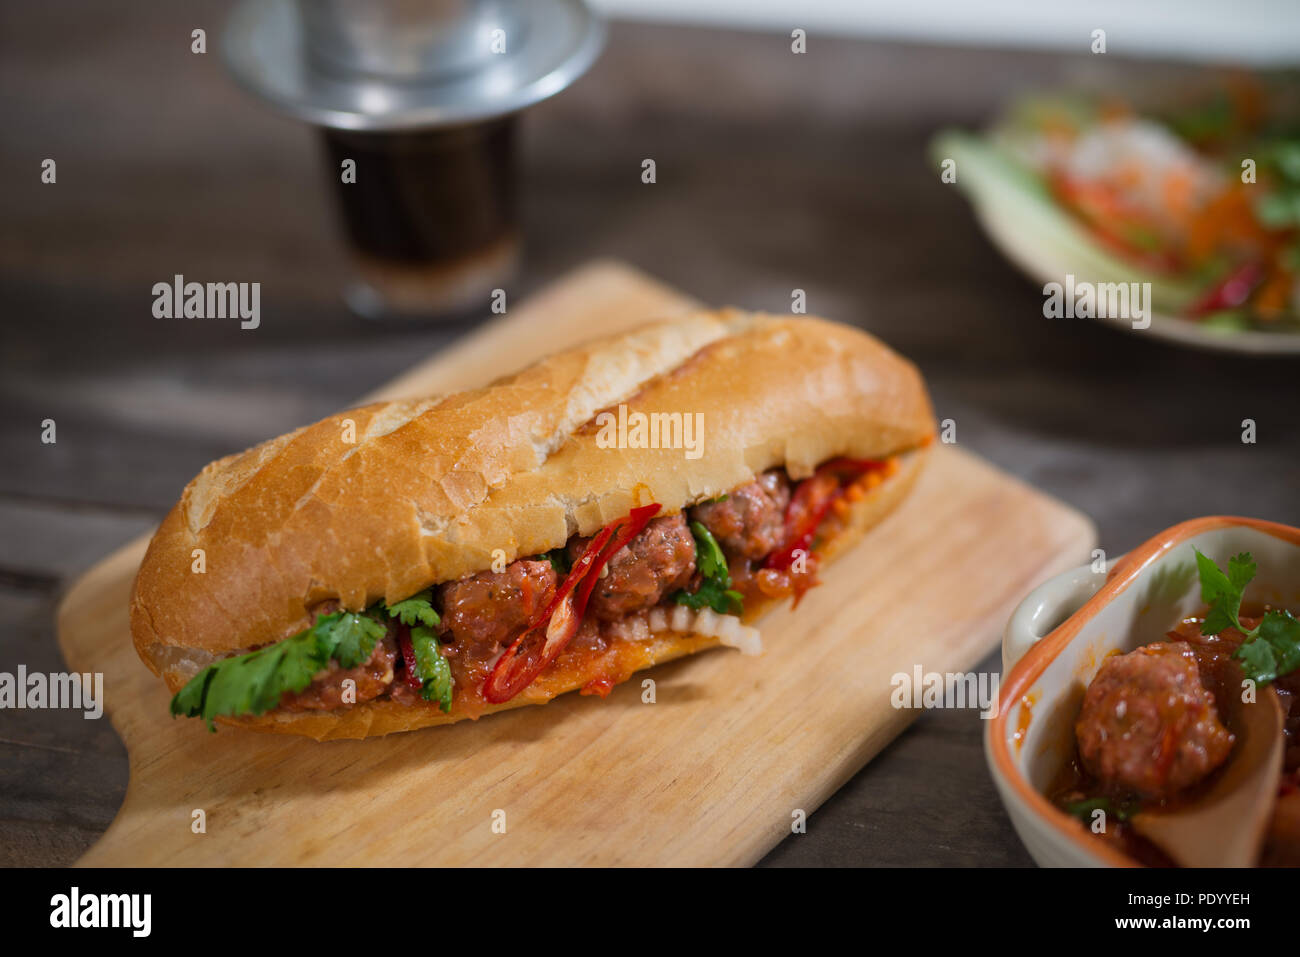 Vietnamese sandwich bread with meatballs in tomato sauce and radish, carrot pickle, cucumber, coriander. Stock Photo